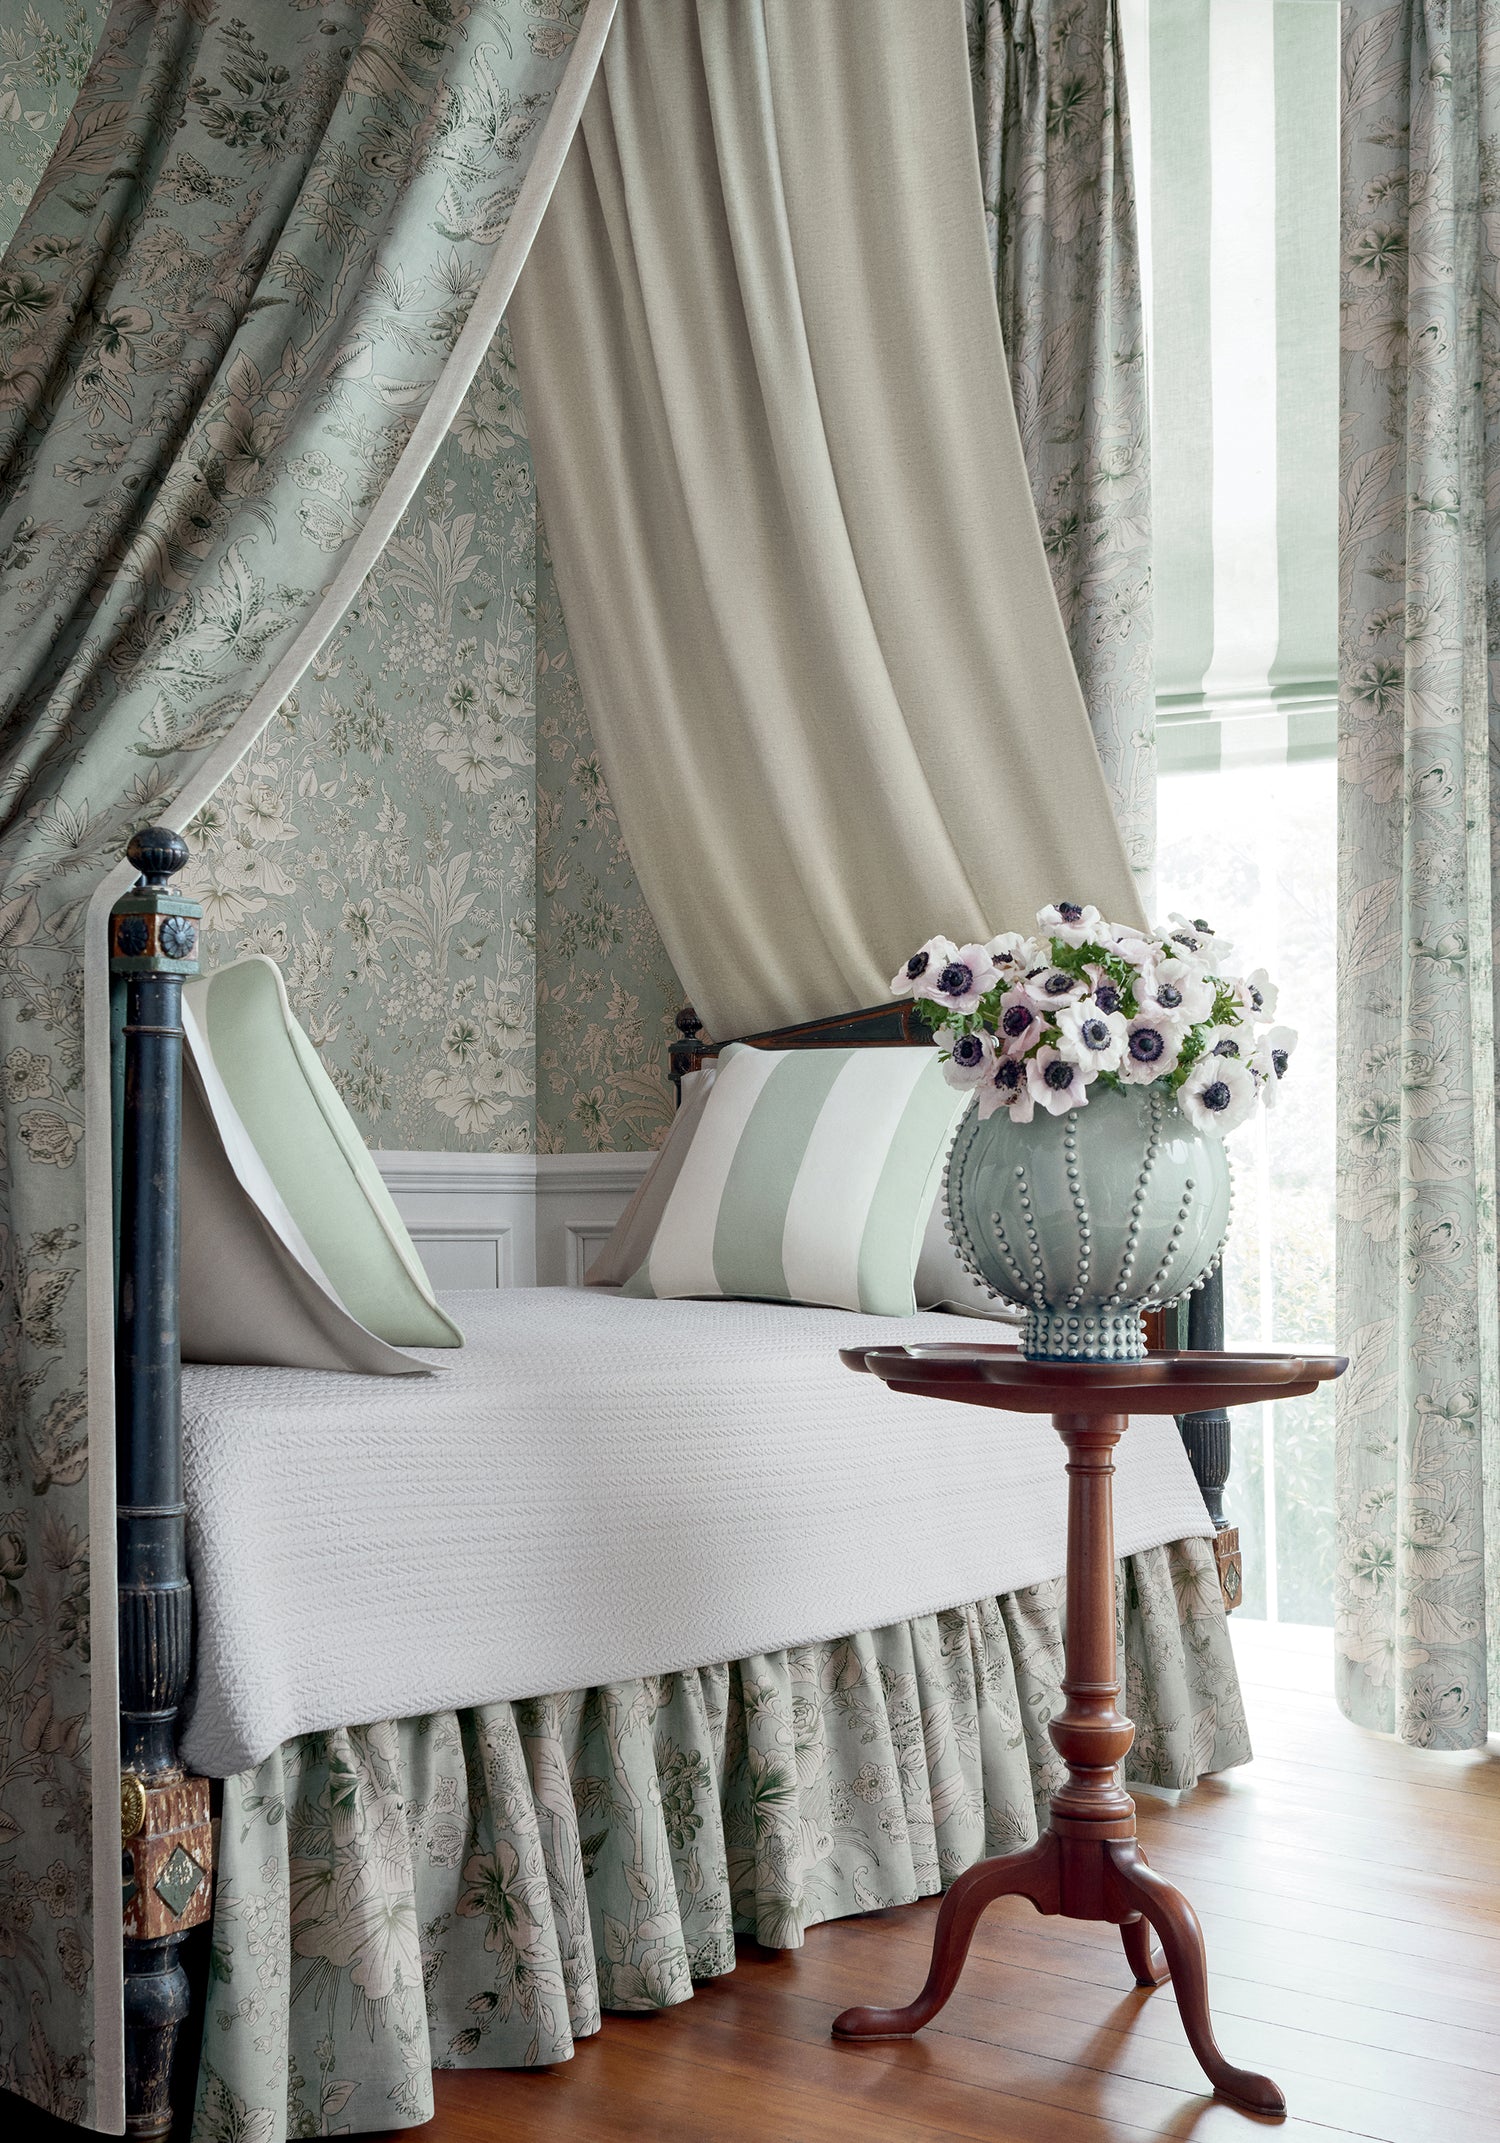 Draperies, bed canopy and skirt in Thibaut Rosalind printed fabric in Mist color pattern number F913603